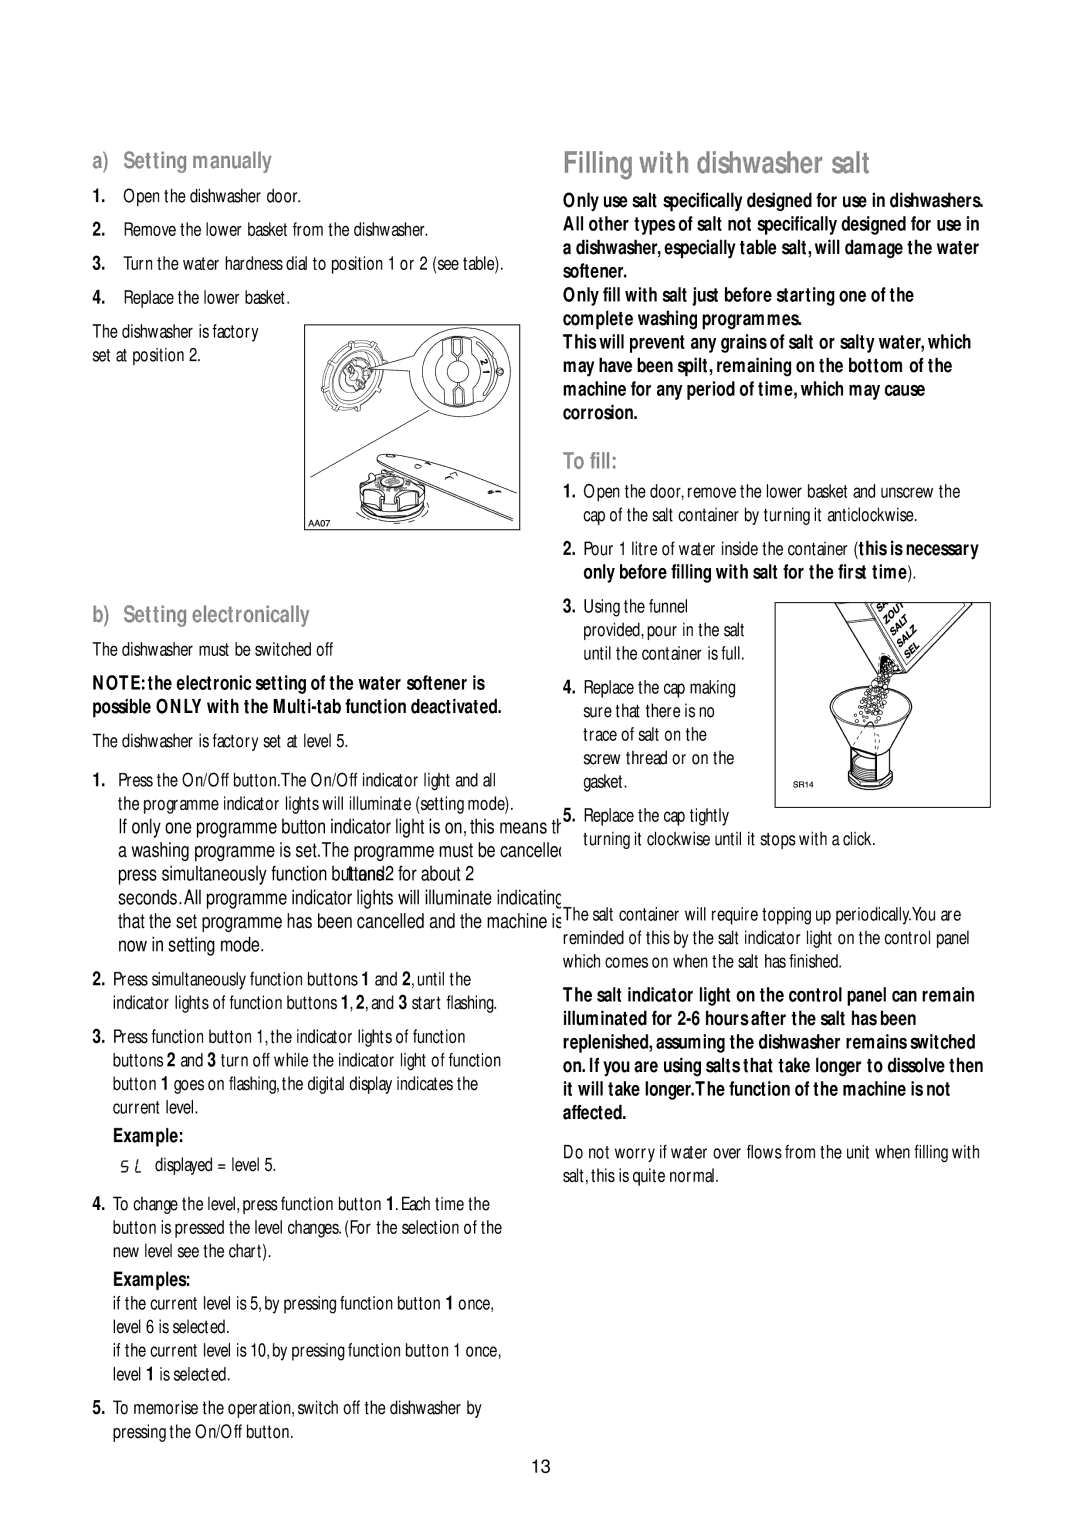 John Lewis JLDWW 905 instruction manual Filling with dishwasher salt, Setting manually, Setting electronically, To fill 